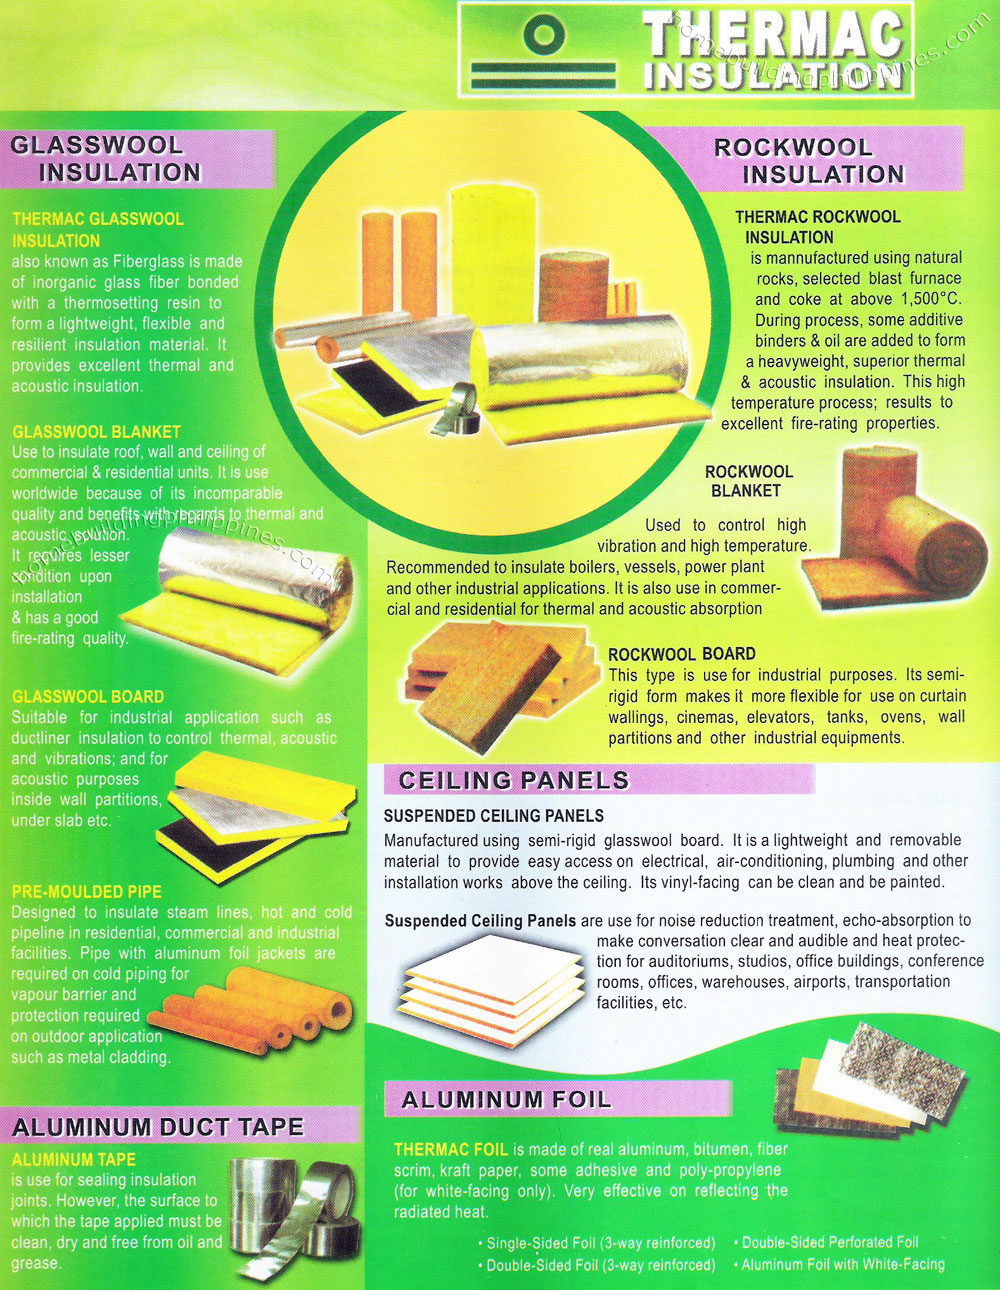 Glasswool Insulation, Rockwool Insulation, Ceiling Panels